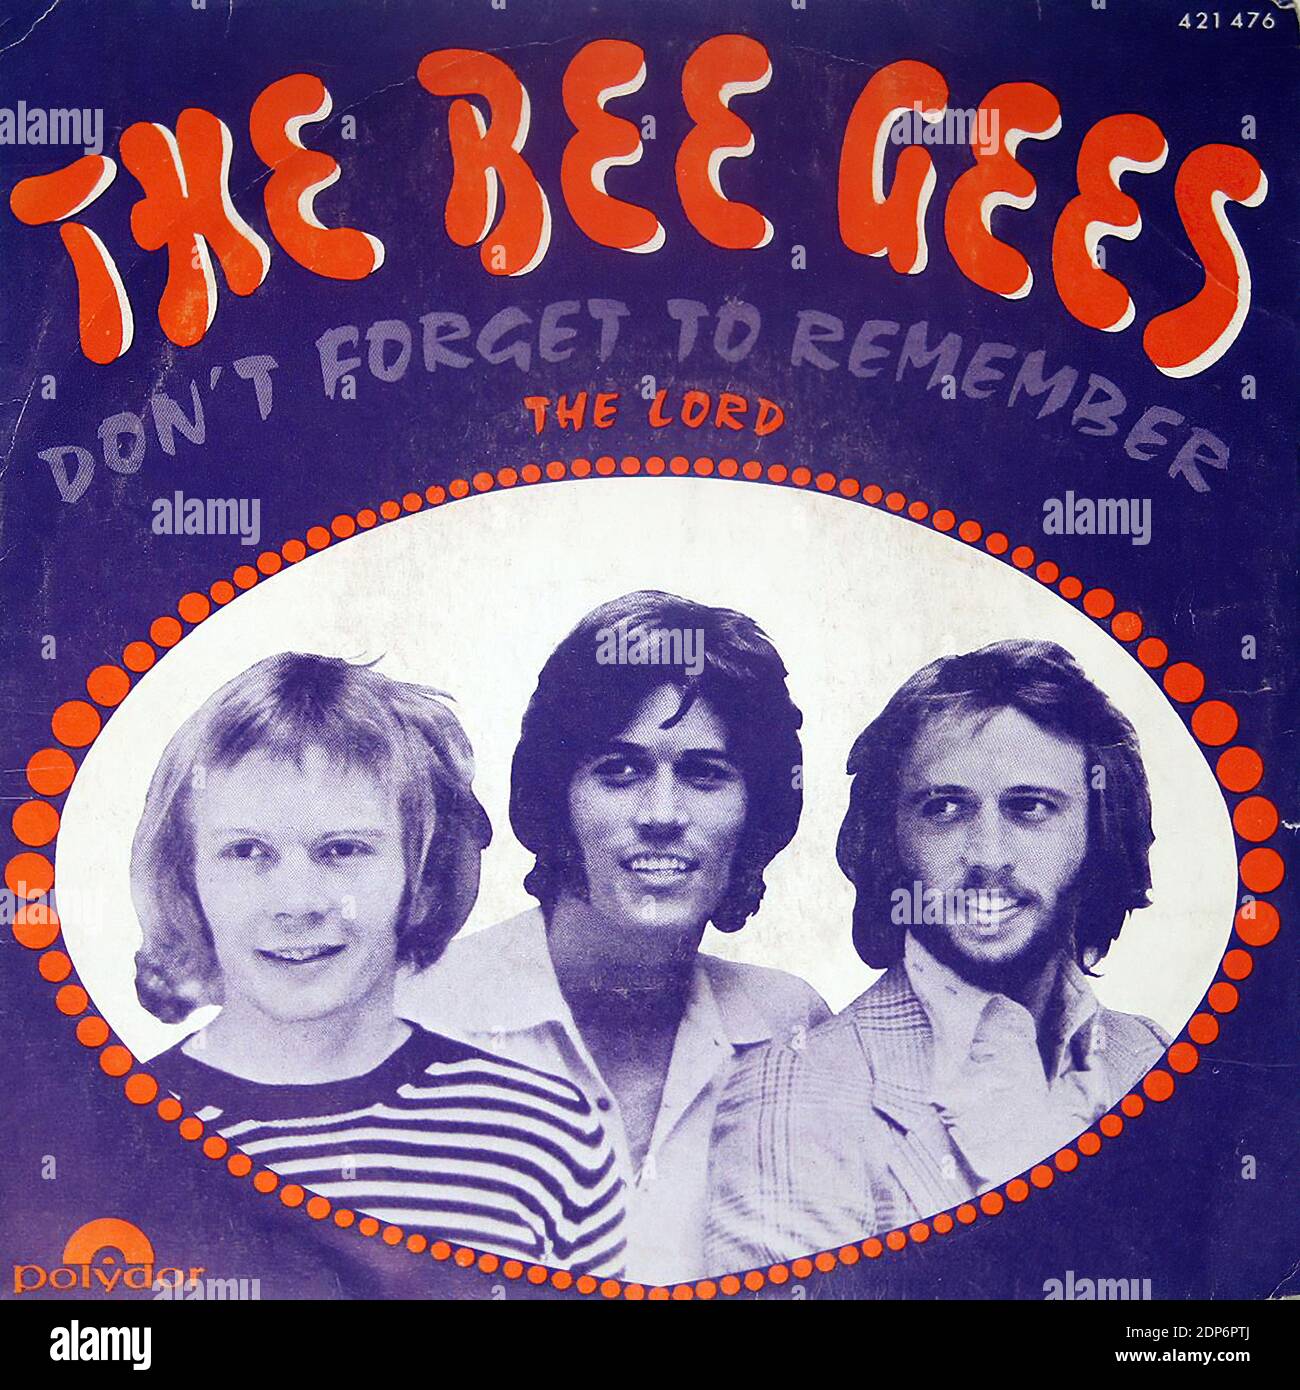 BEE GEES Dont Forget to Remember The Lord - Vintage Vinyl Record Cover  Stock Photo - Alamy